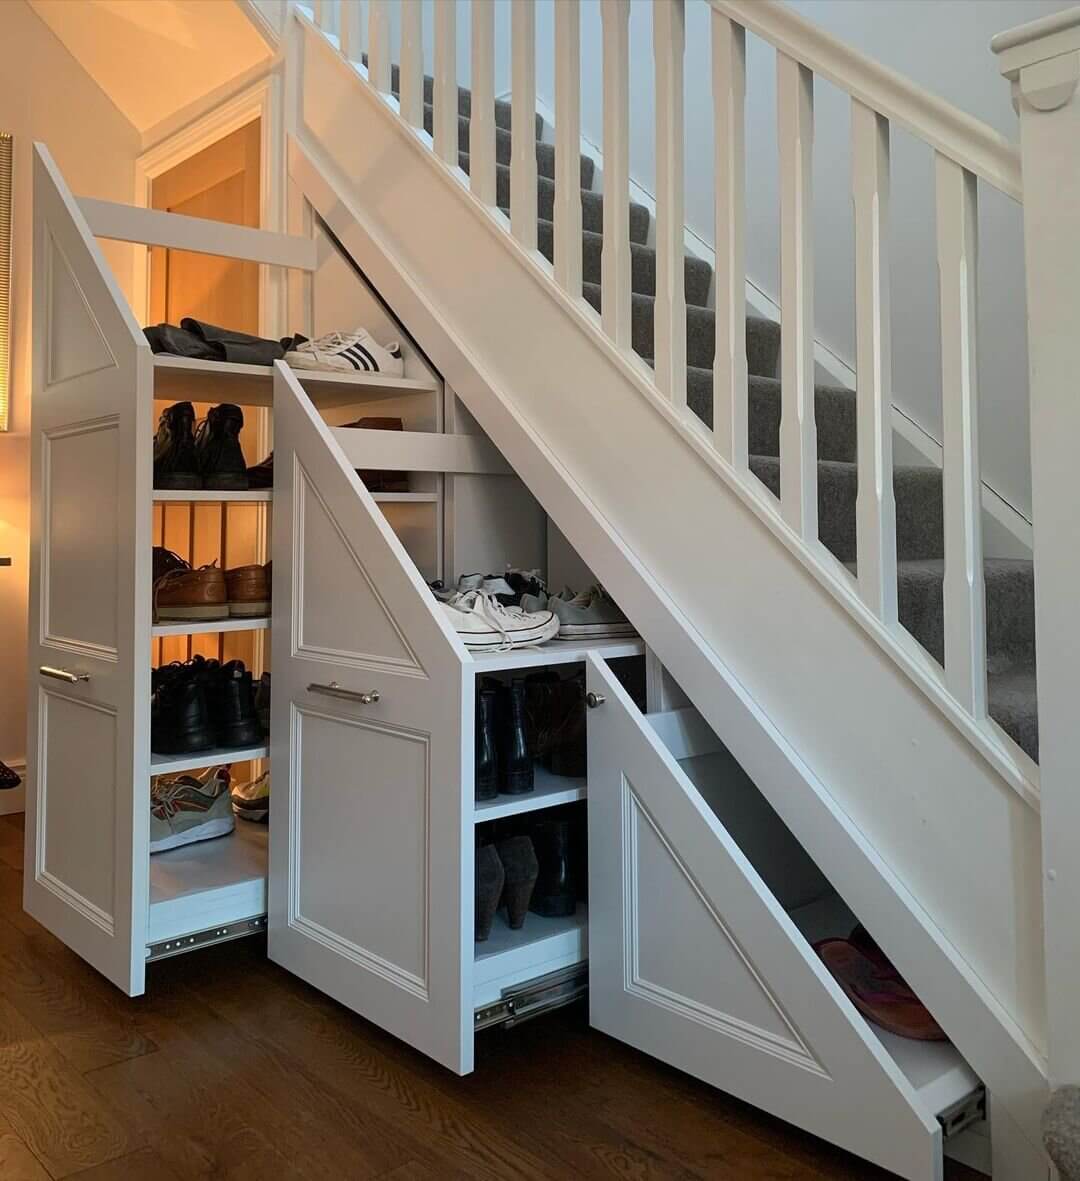 20 ideas under the stairs you will love - 131